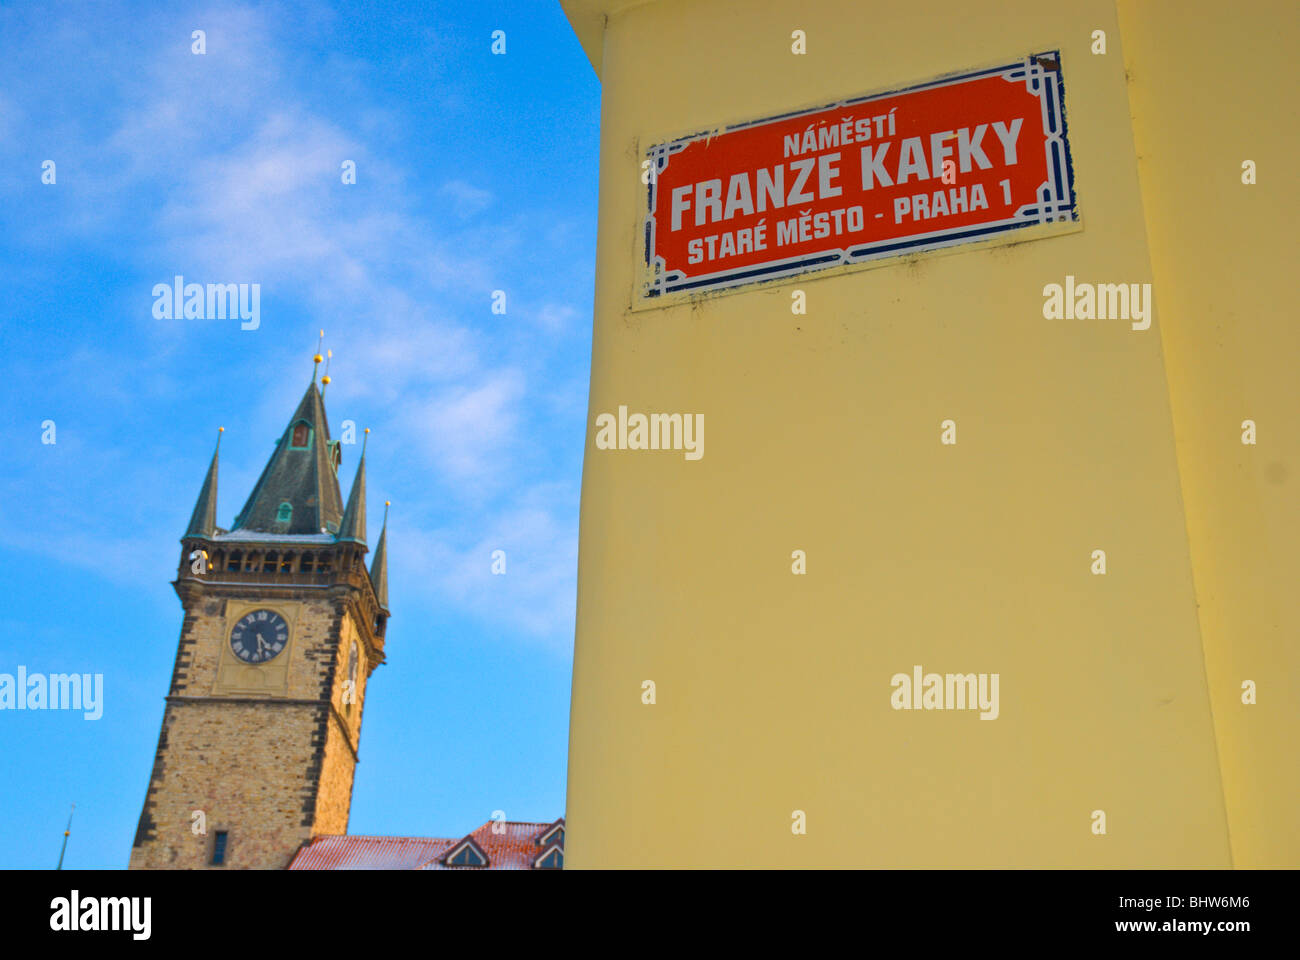 Frank Kafka square sign and old town hall tower Prague Czech Republic Europe Stock Photo